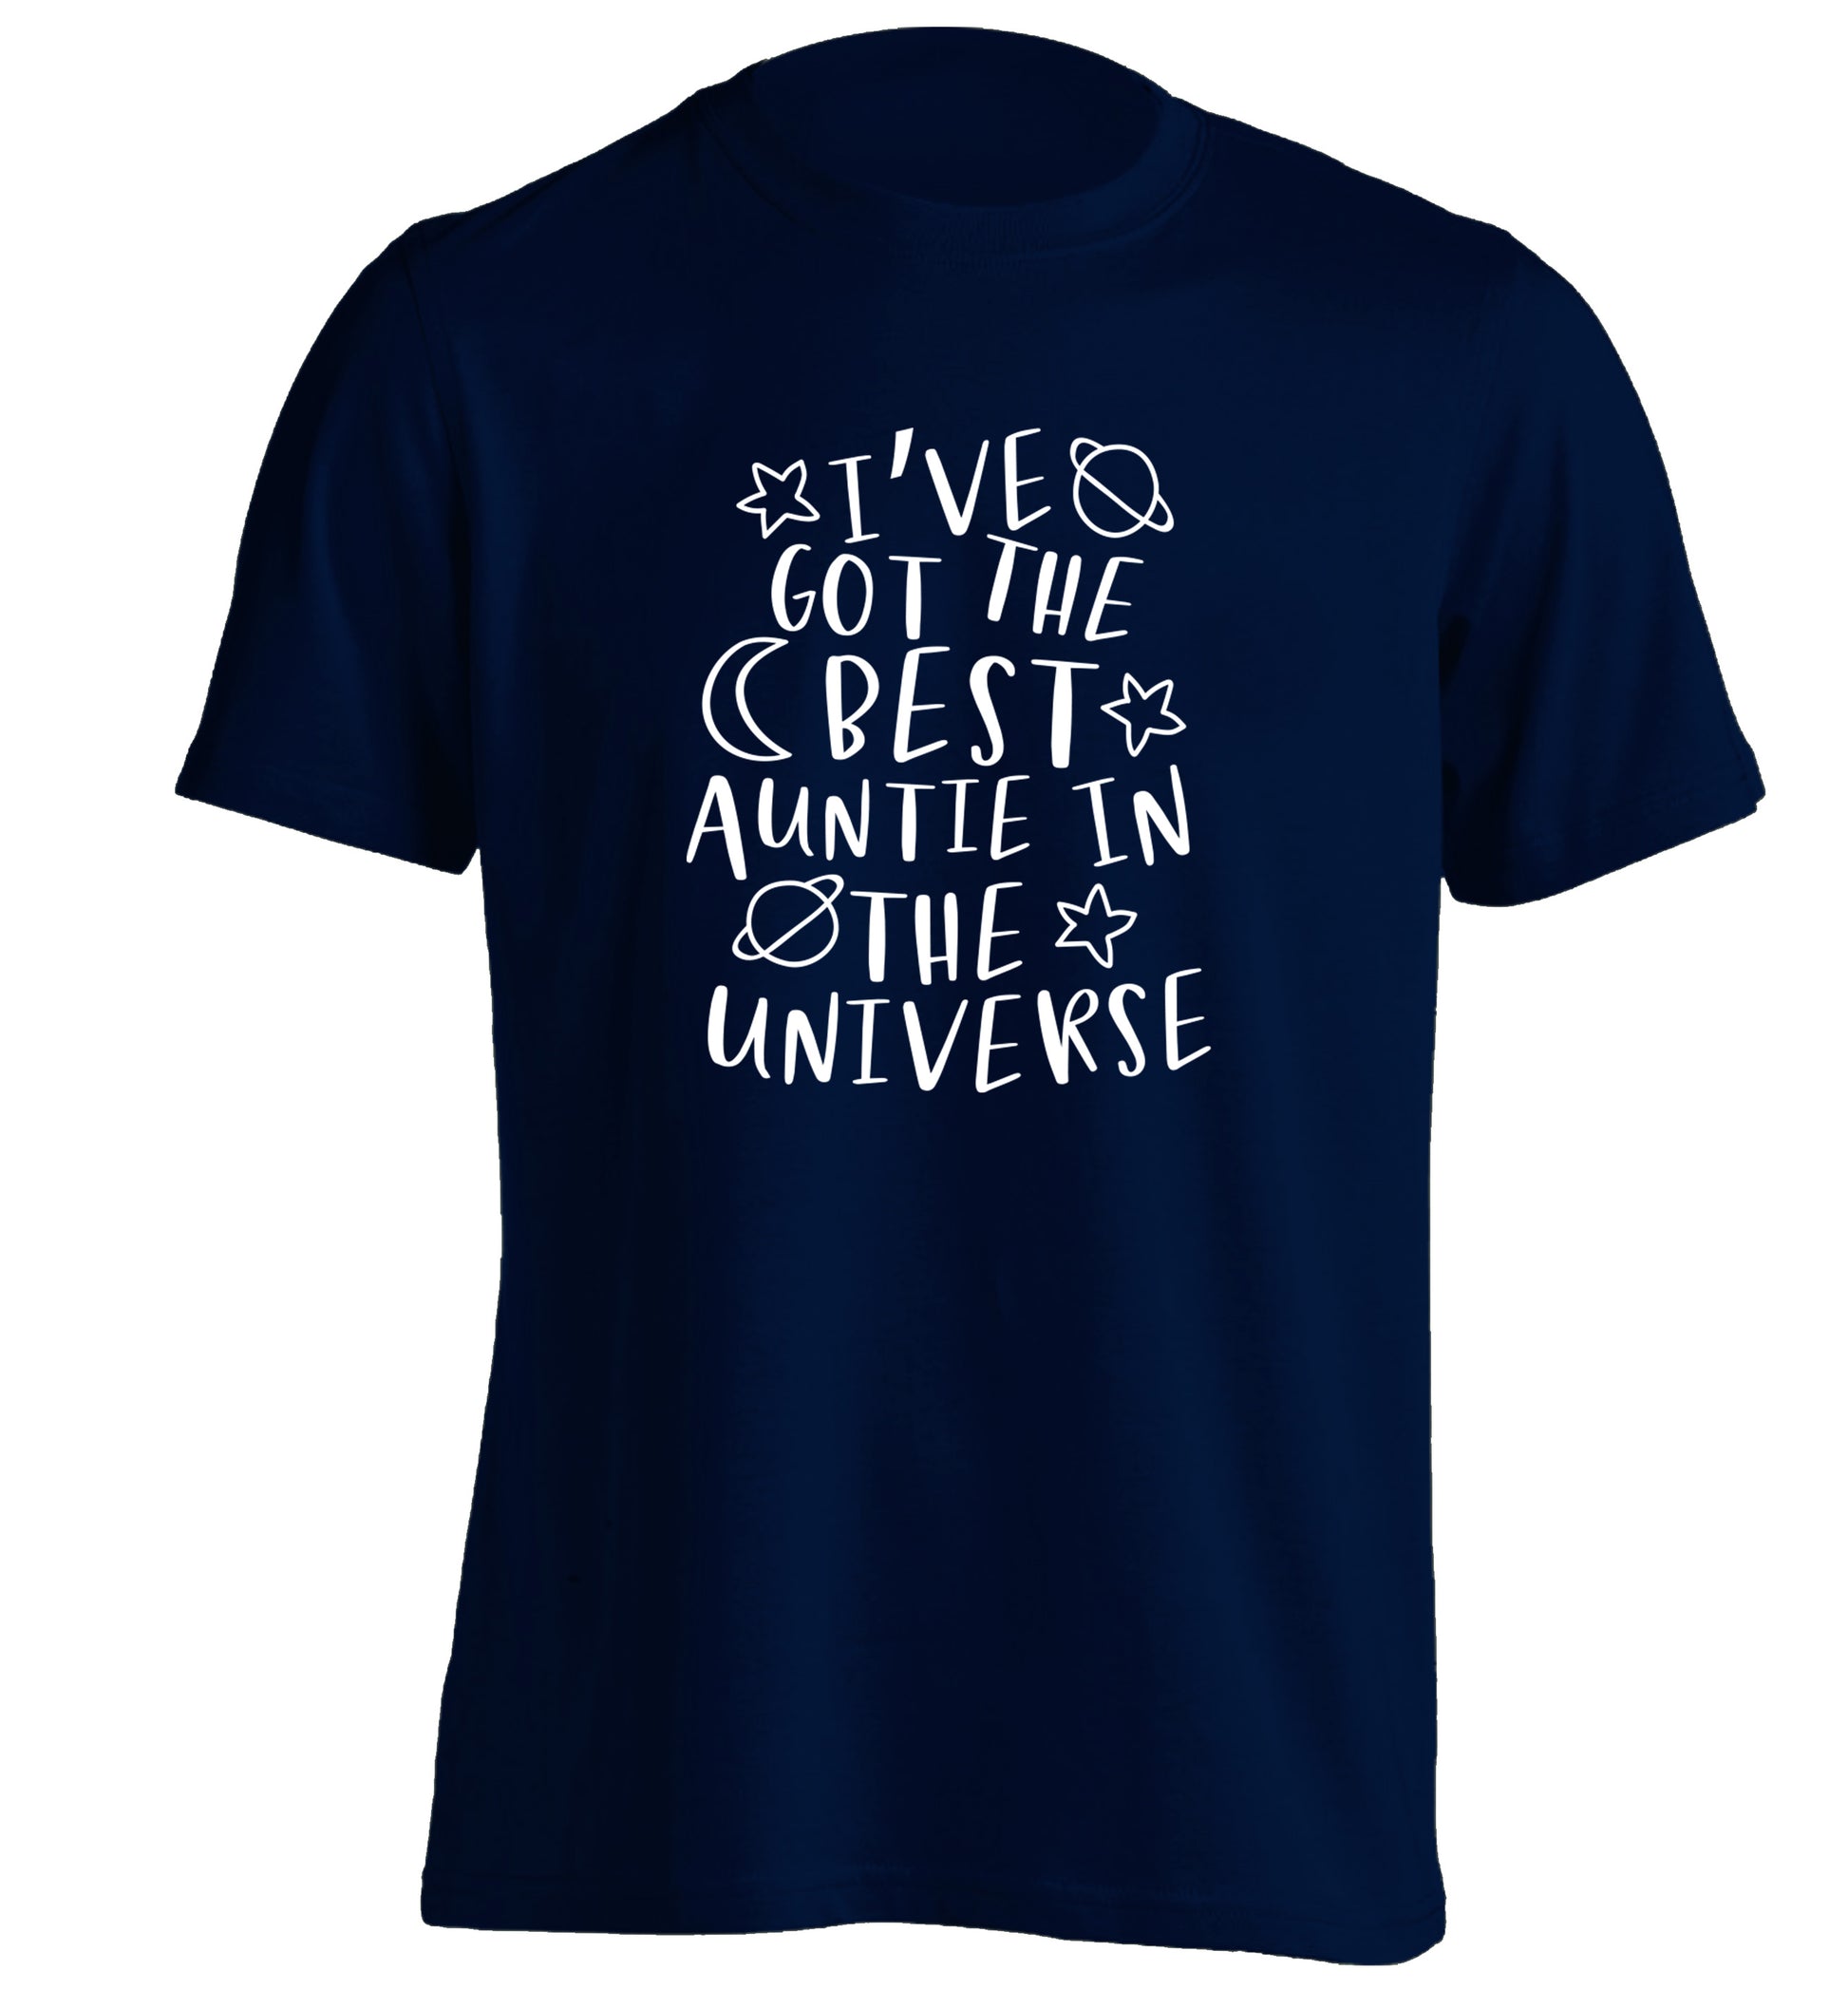 I've got the best auntie in the universe adults unisex navy Tshirt 2XL